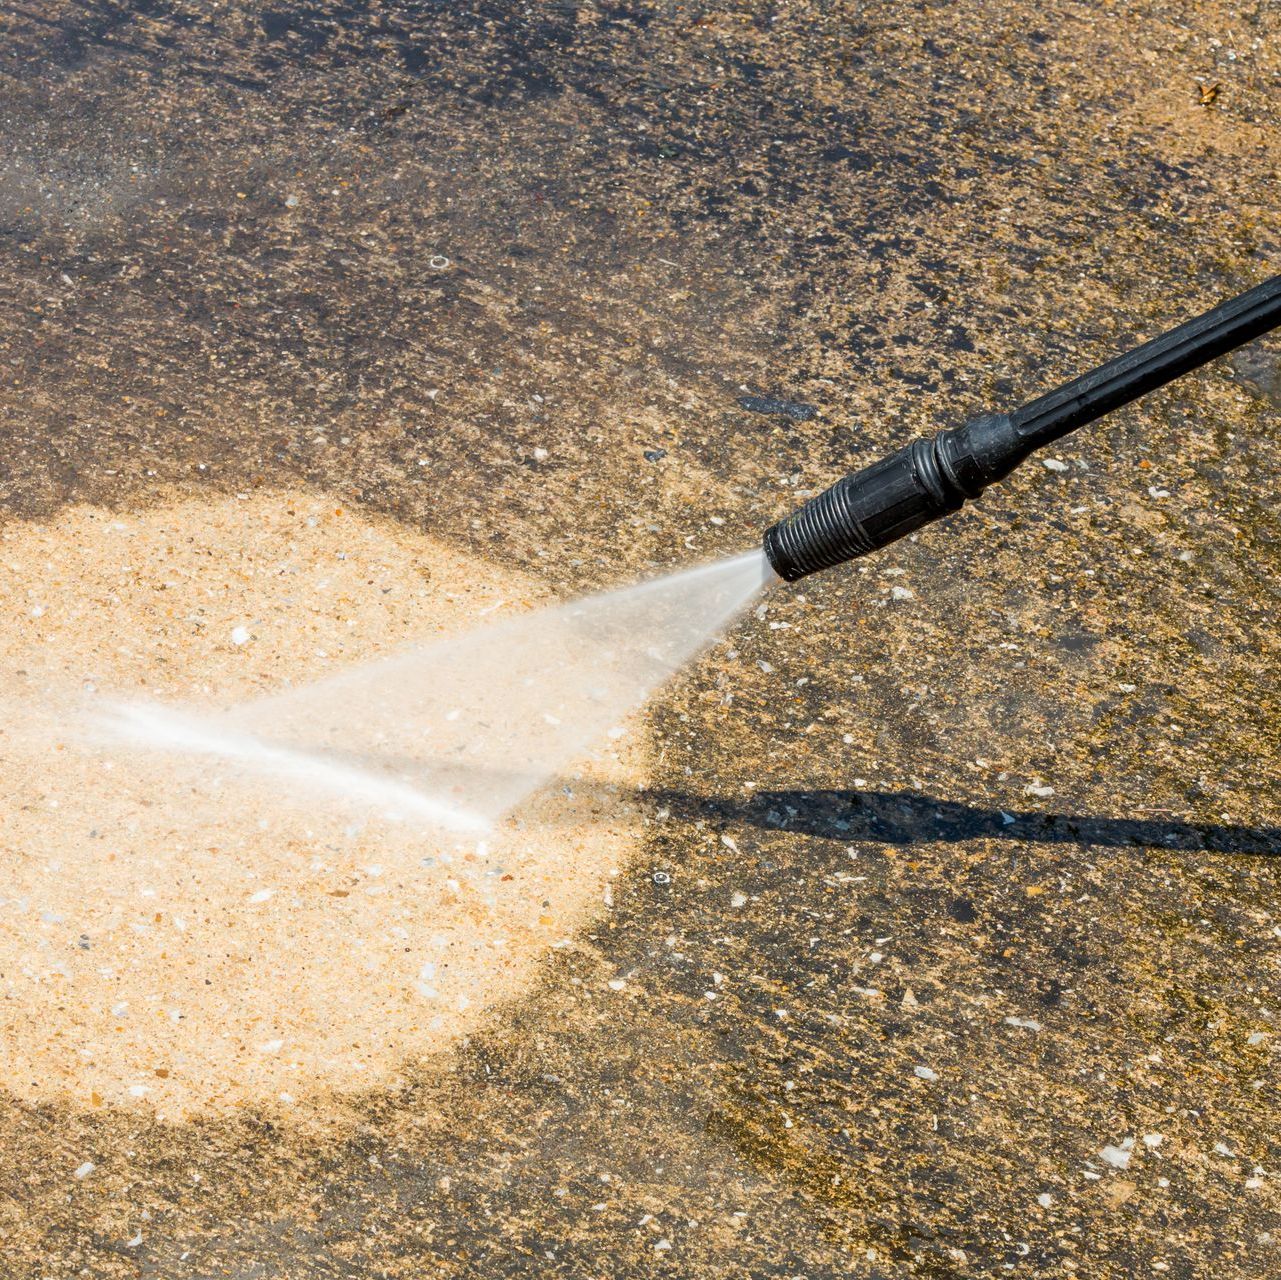 a person is using a high pressure washer to clean a concrete surface